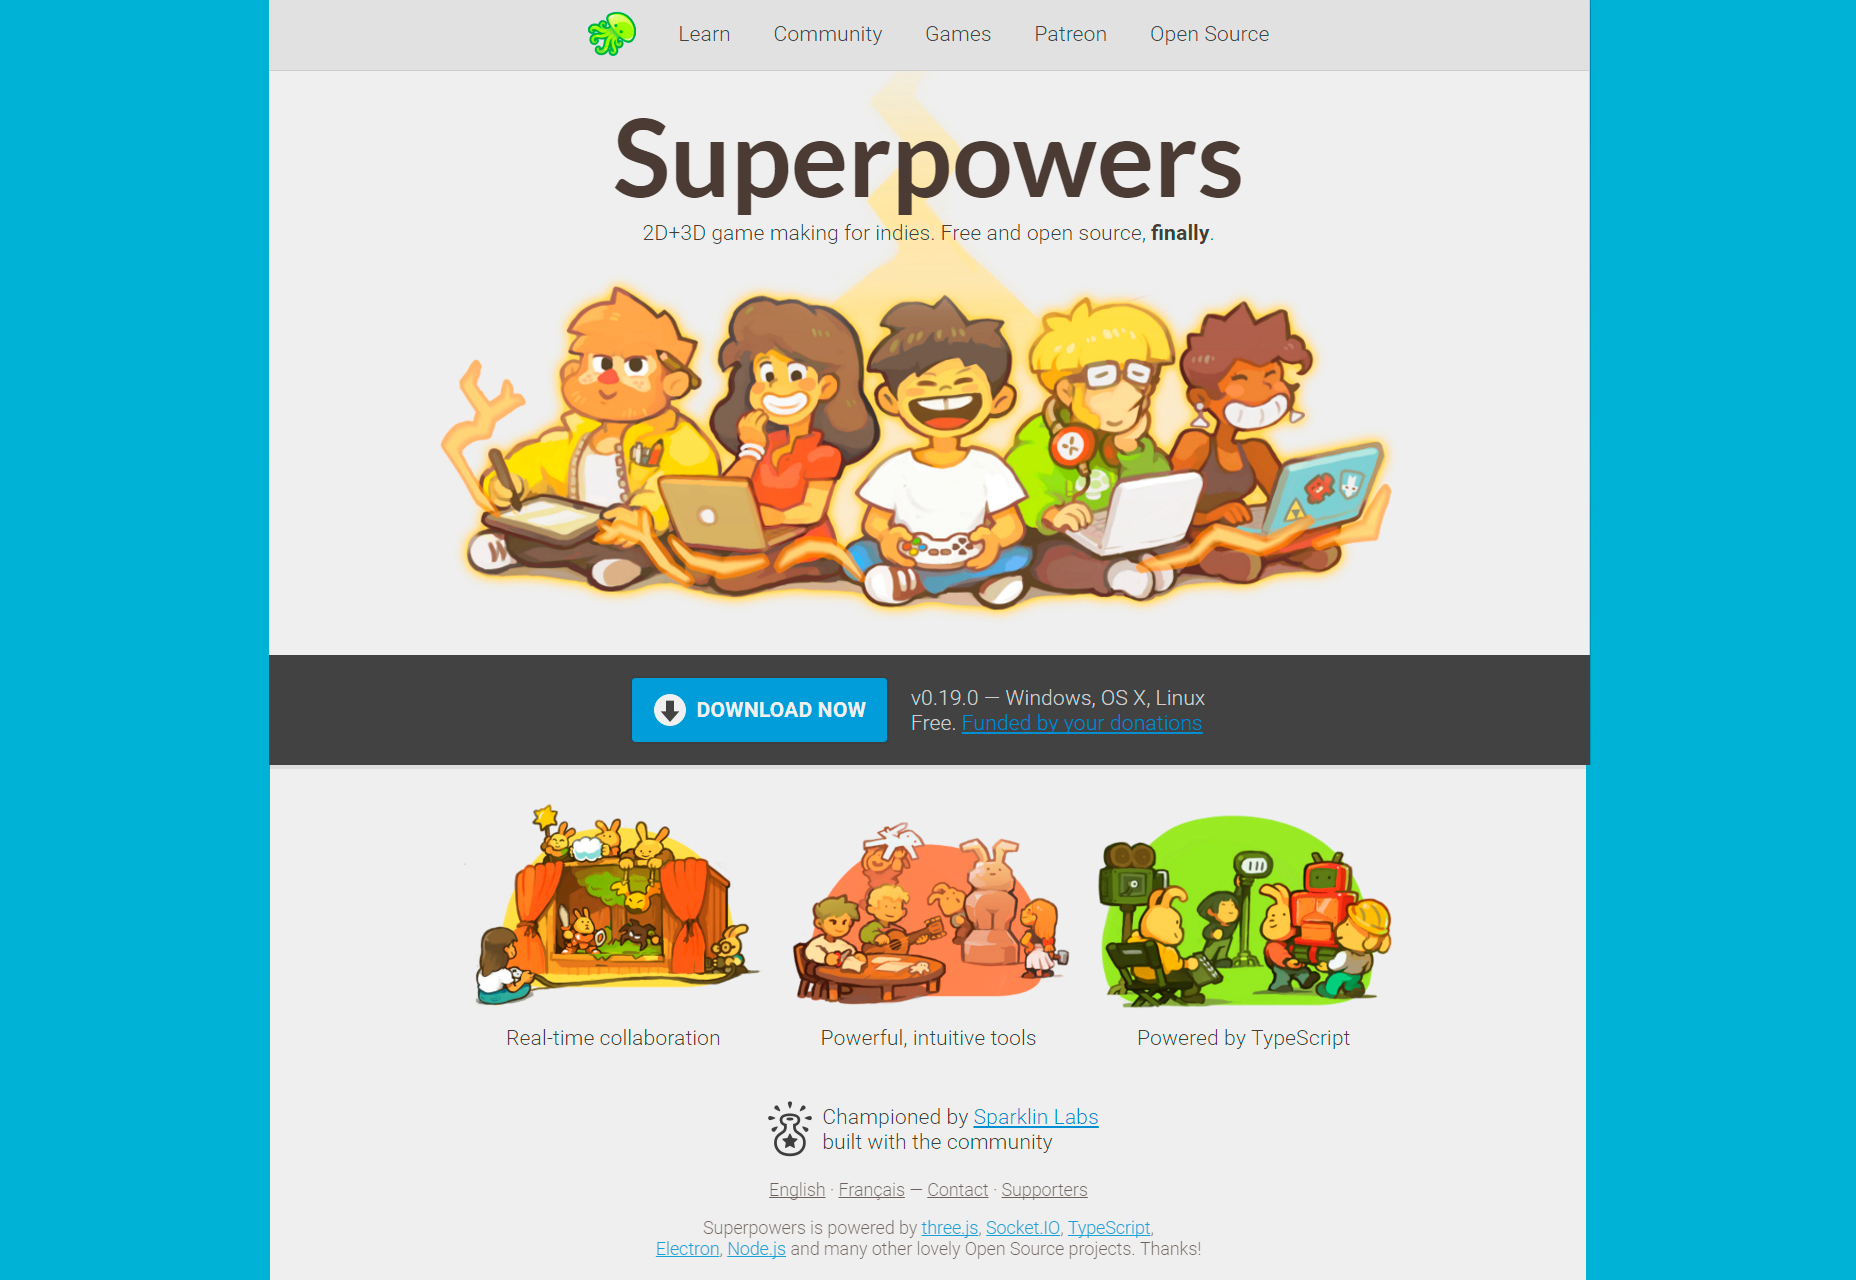 superpowers-2d-3d-open-source-game-making-environment